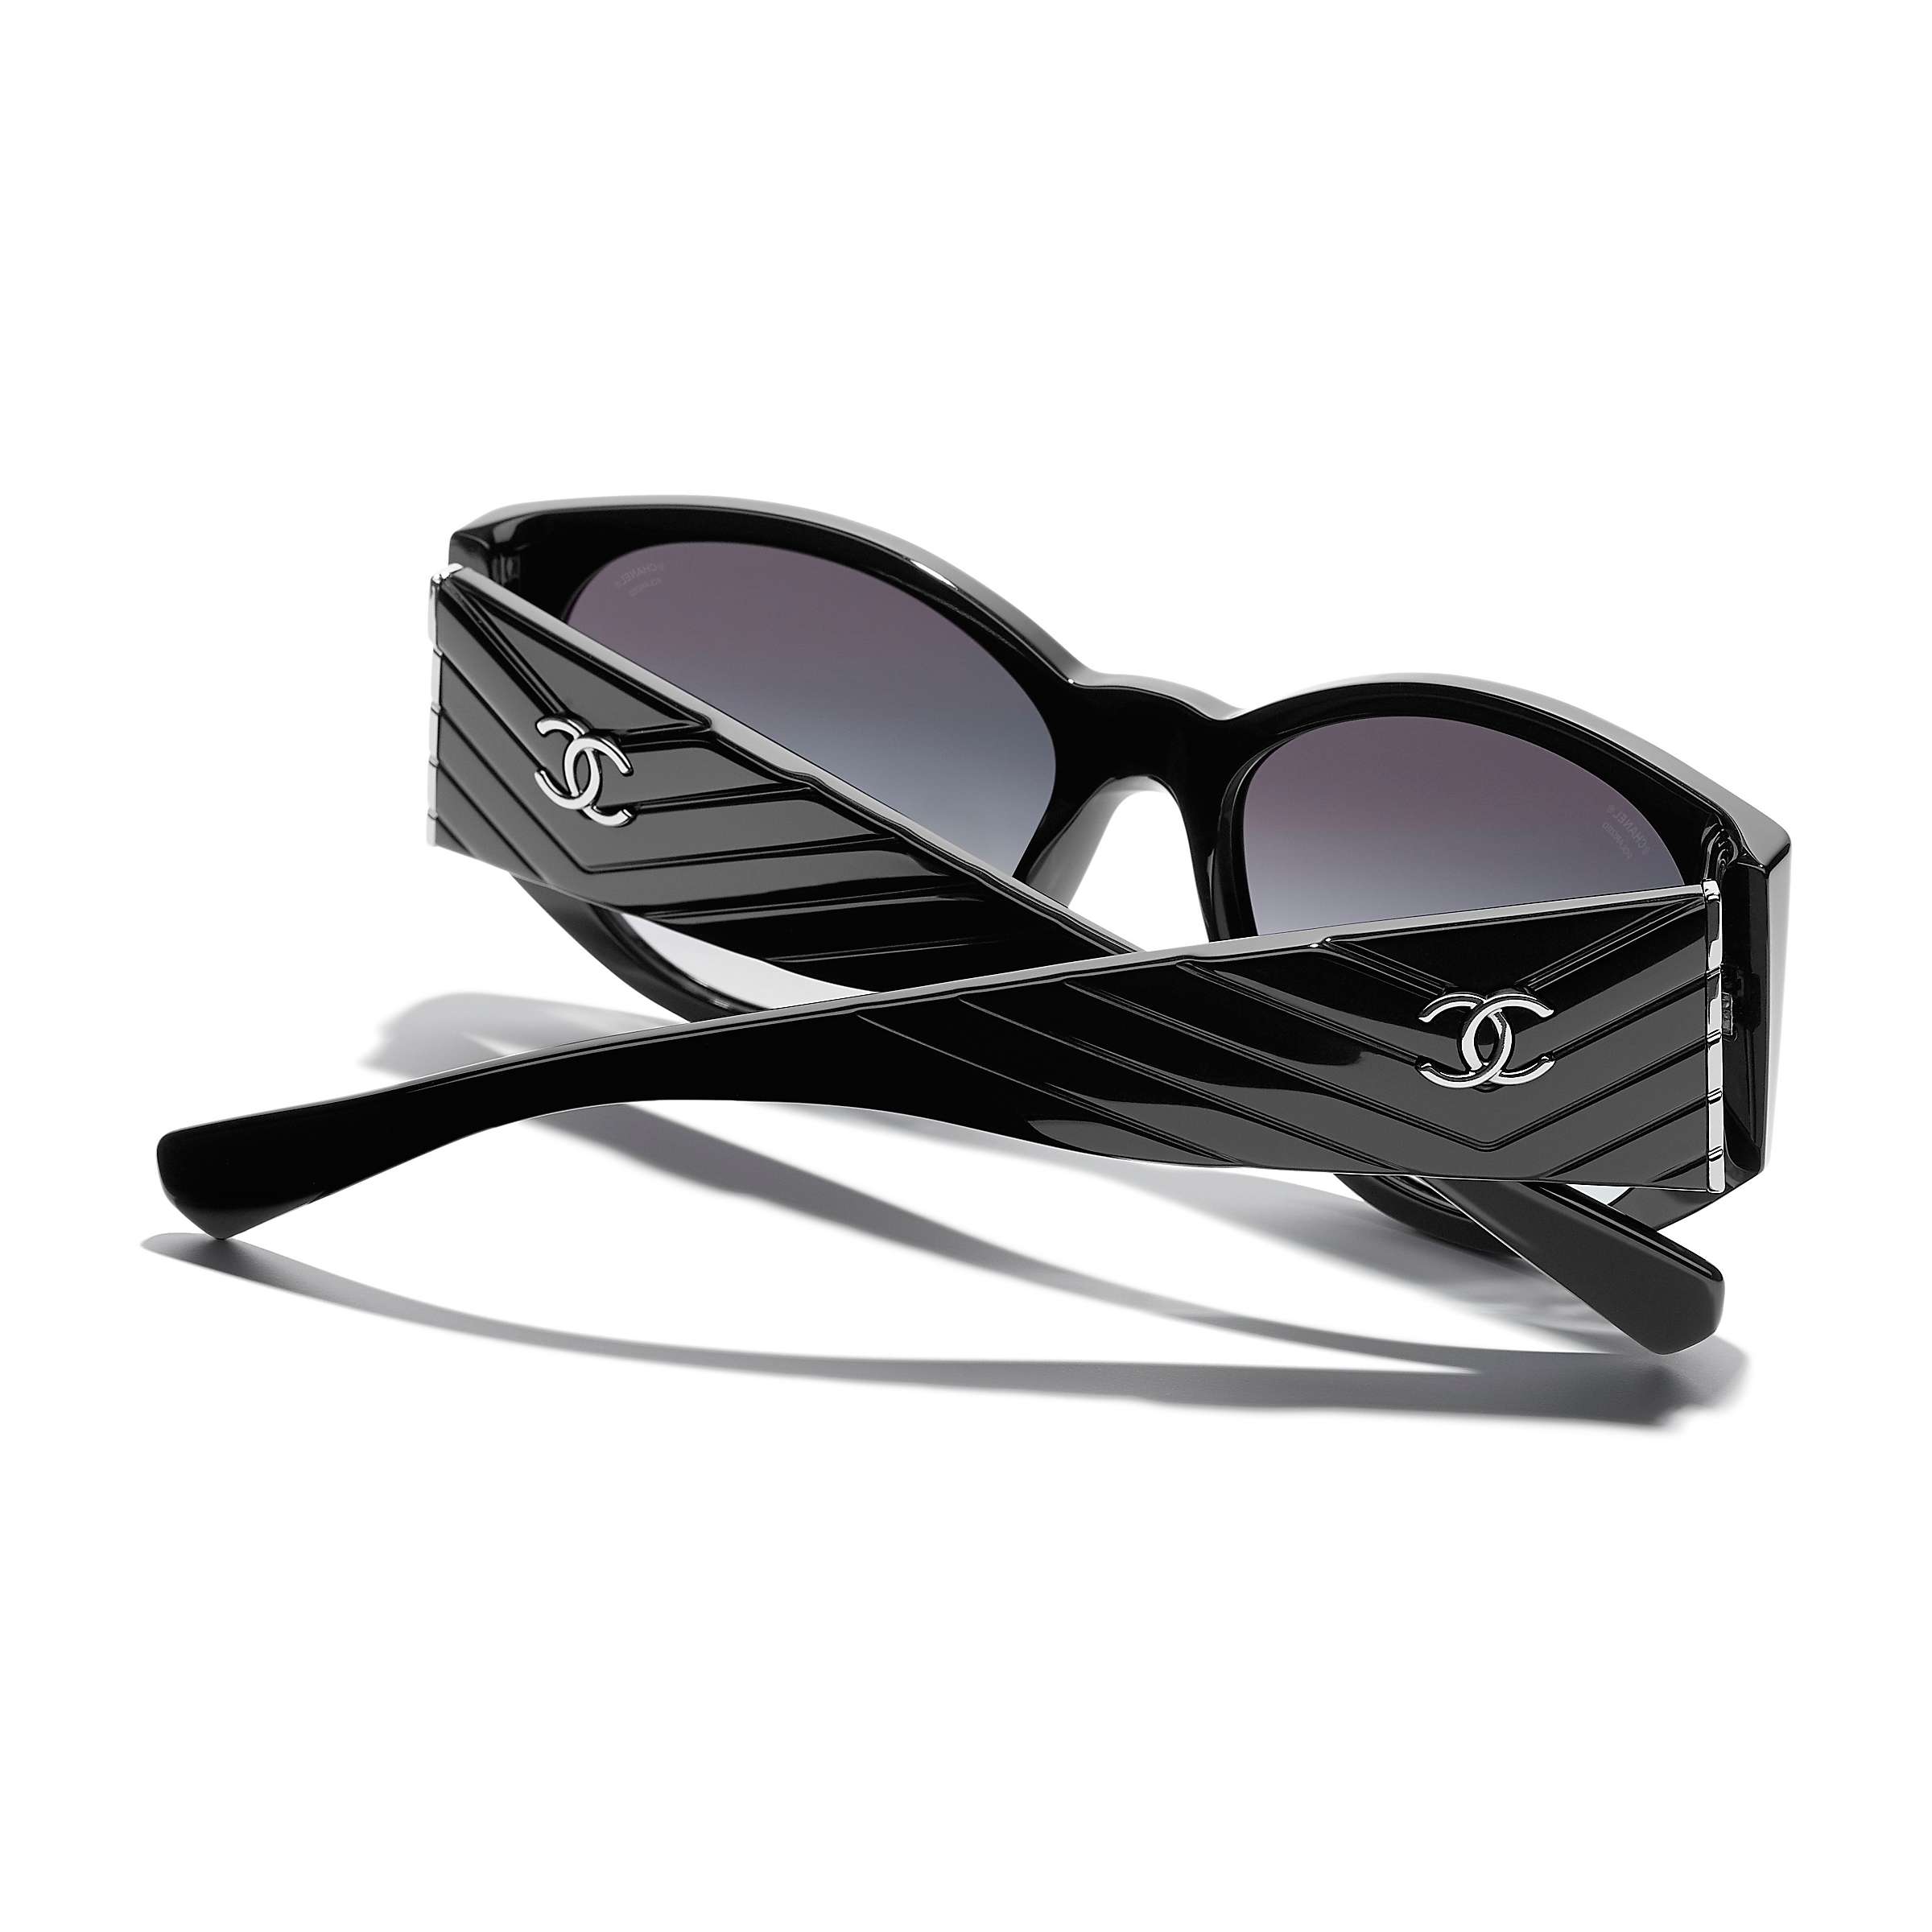 Buy CHANEL Oval Sunglasses CH5411 Black/Grey Online at johnlewis.com